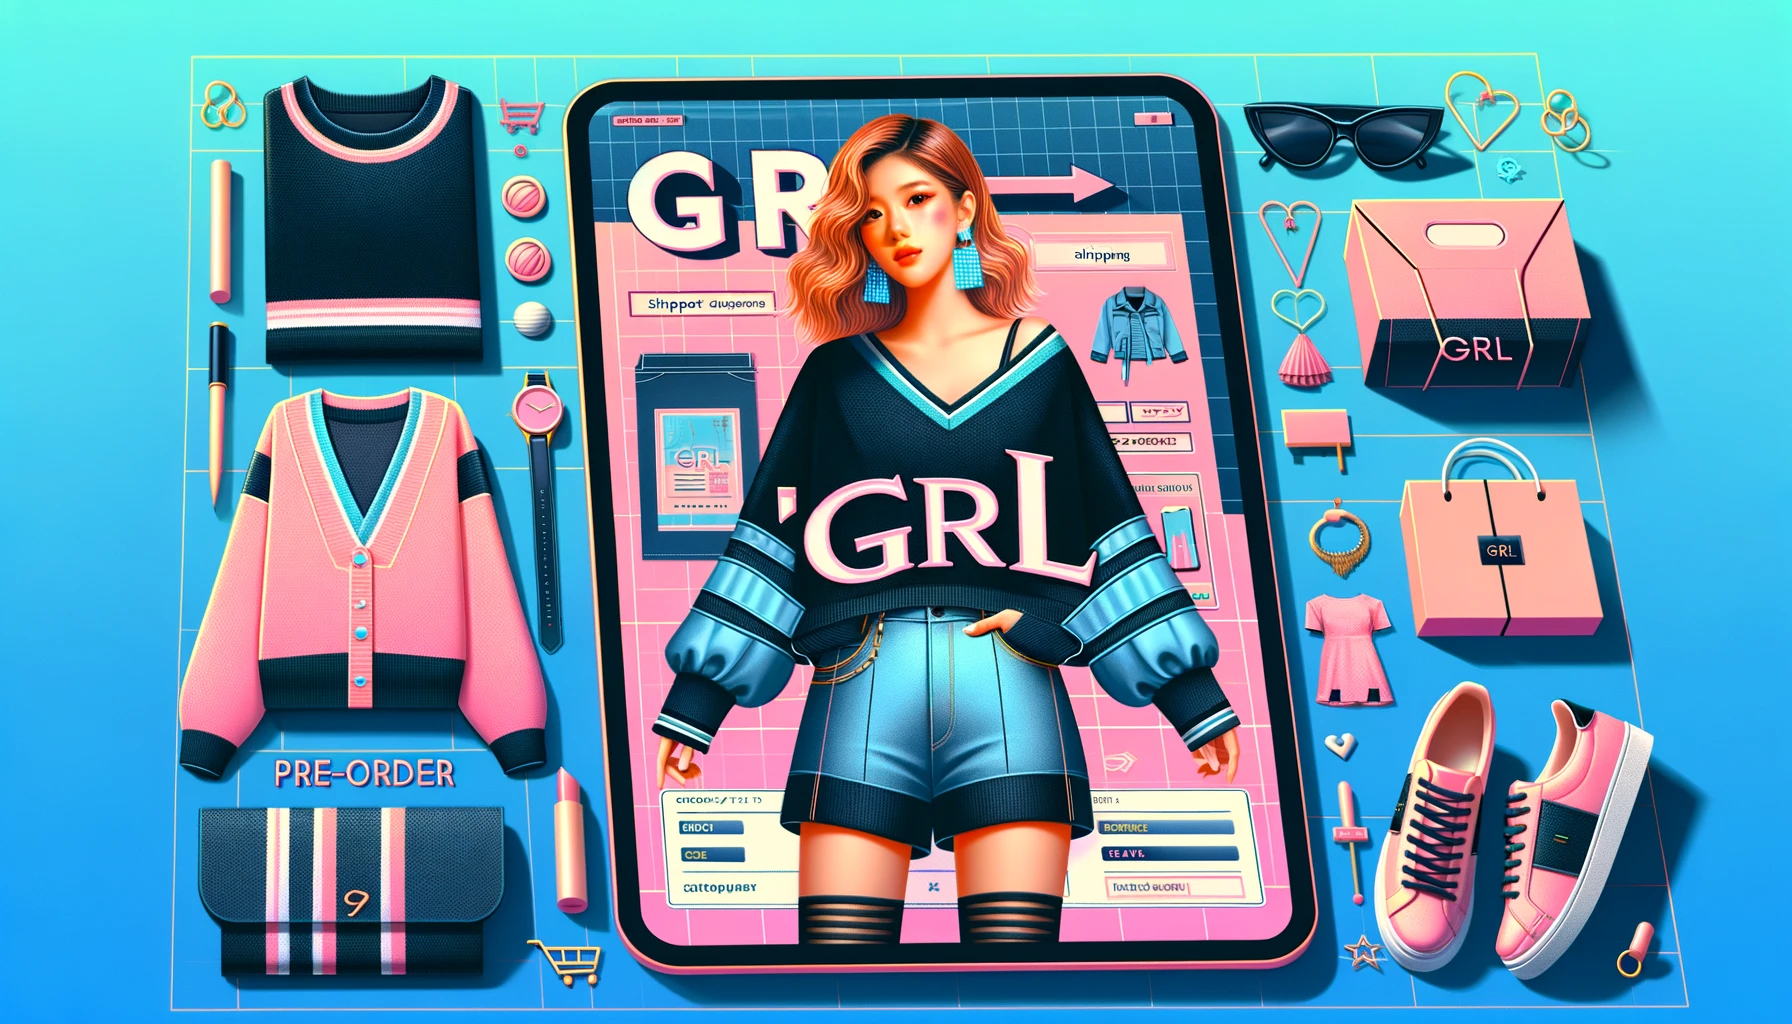 A stylish layout for a Japanese women's budget fashion brand named 'GRL' with a focus on shipping for pre-order items. The image features trendy and affordable clothing items displayed attractively, with visual elements representing pre-order shipping. Incorporate the word 'GRL' prominently in the design. The background should be vibrant and fashionable, reflecting the brand's appeal to young women. The image should be in a 16:9 aspect ratio.